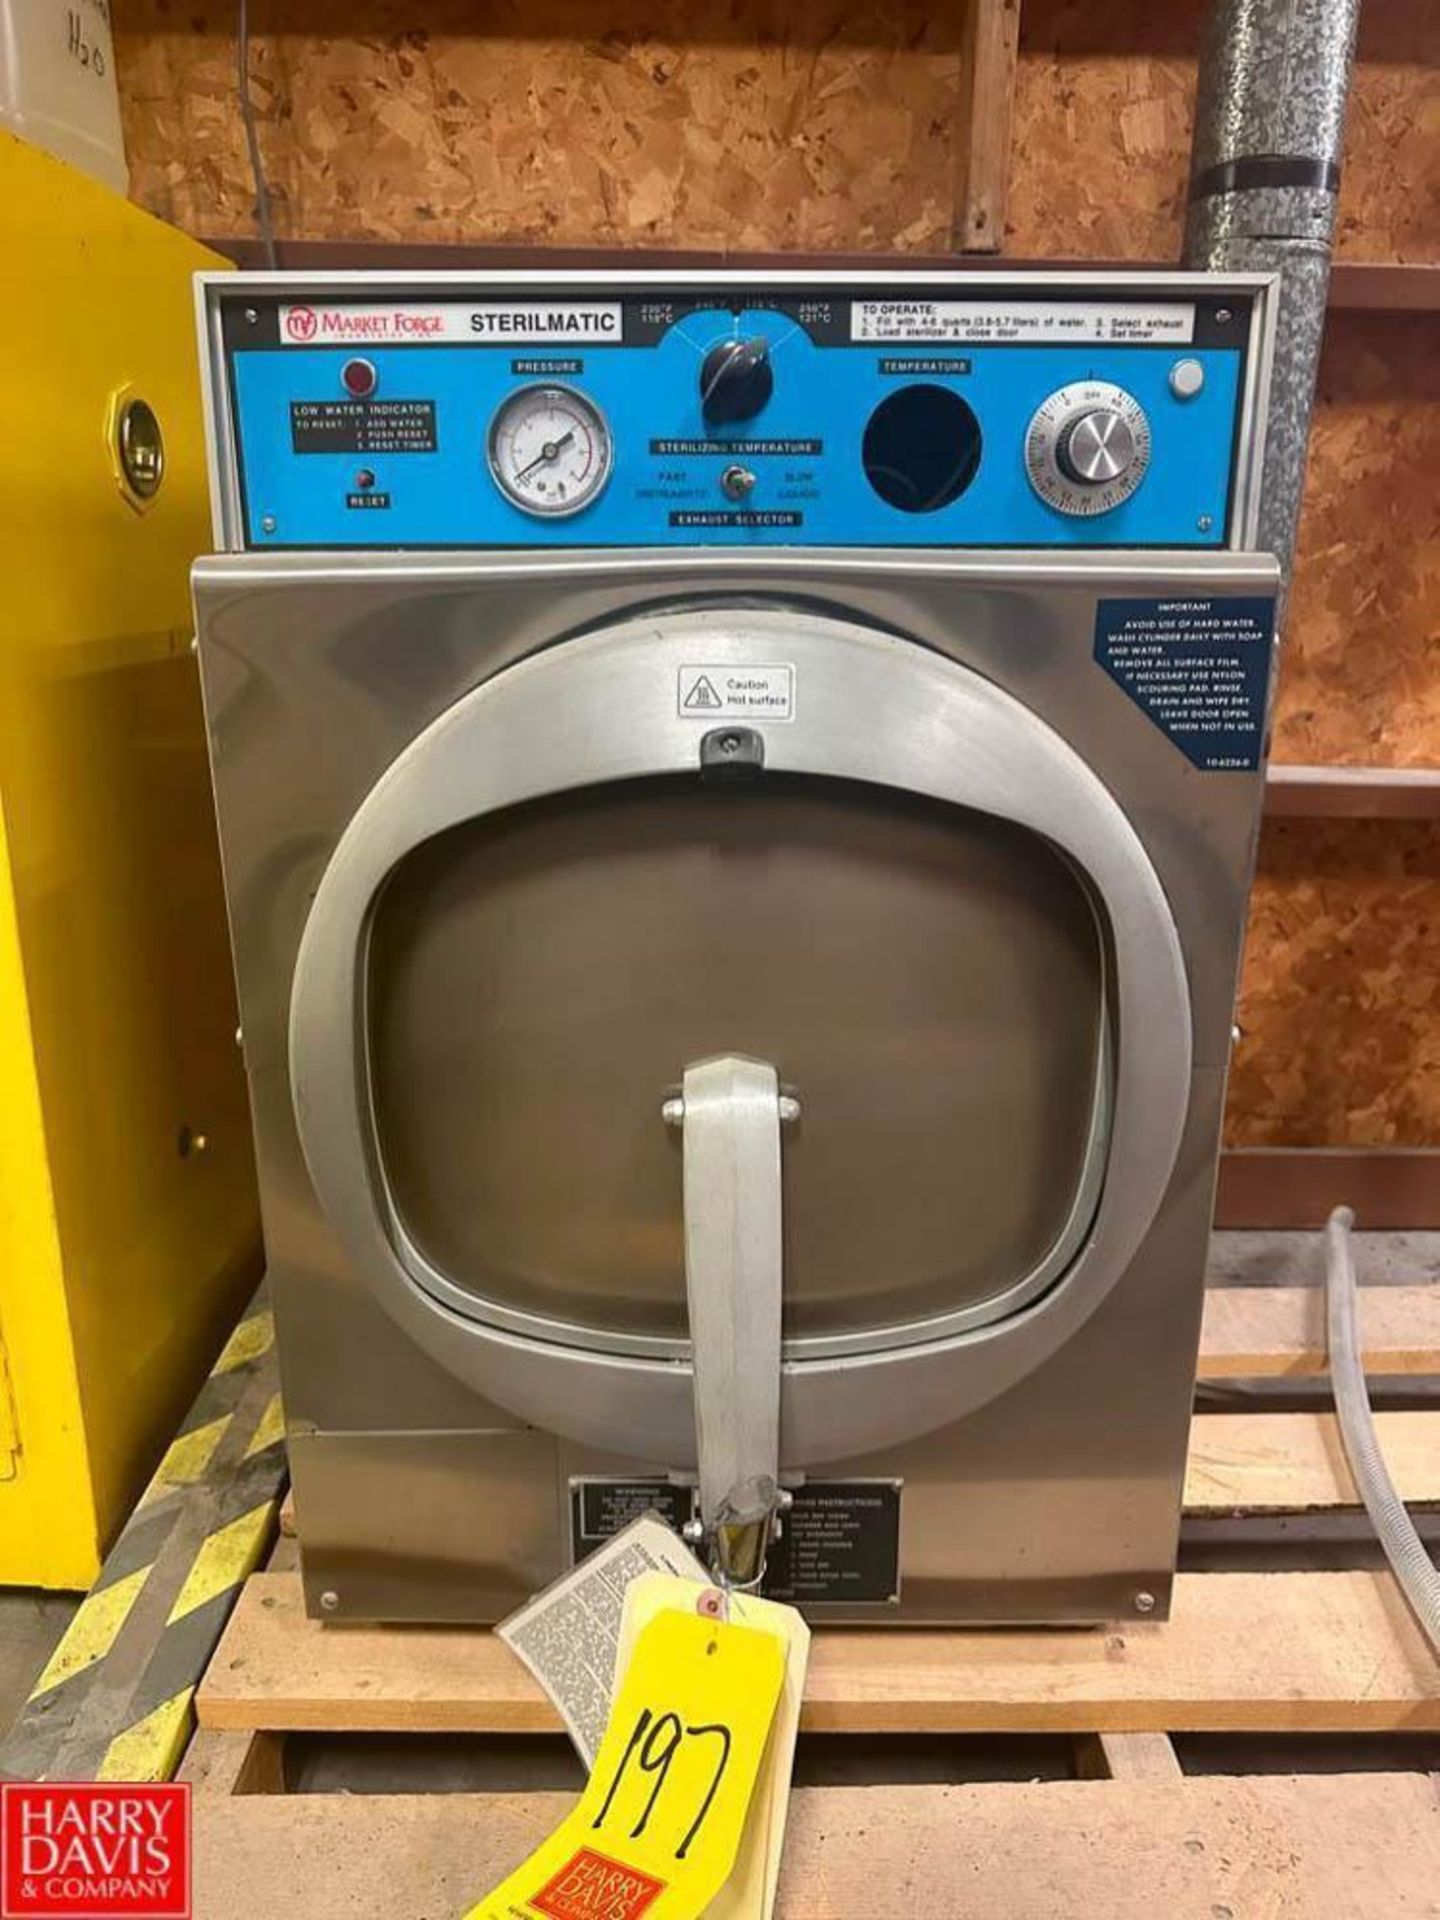 Market Forge Sterilmatic Autoclave - Rigging Fee: $50